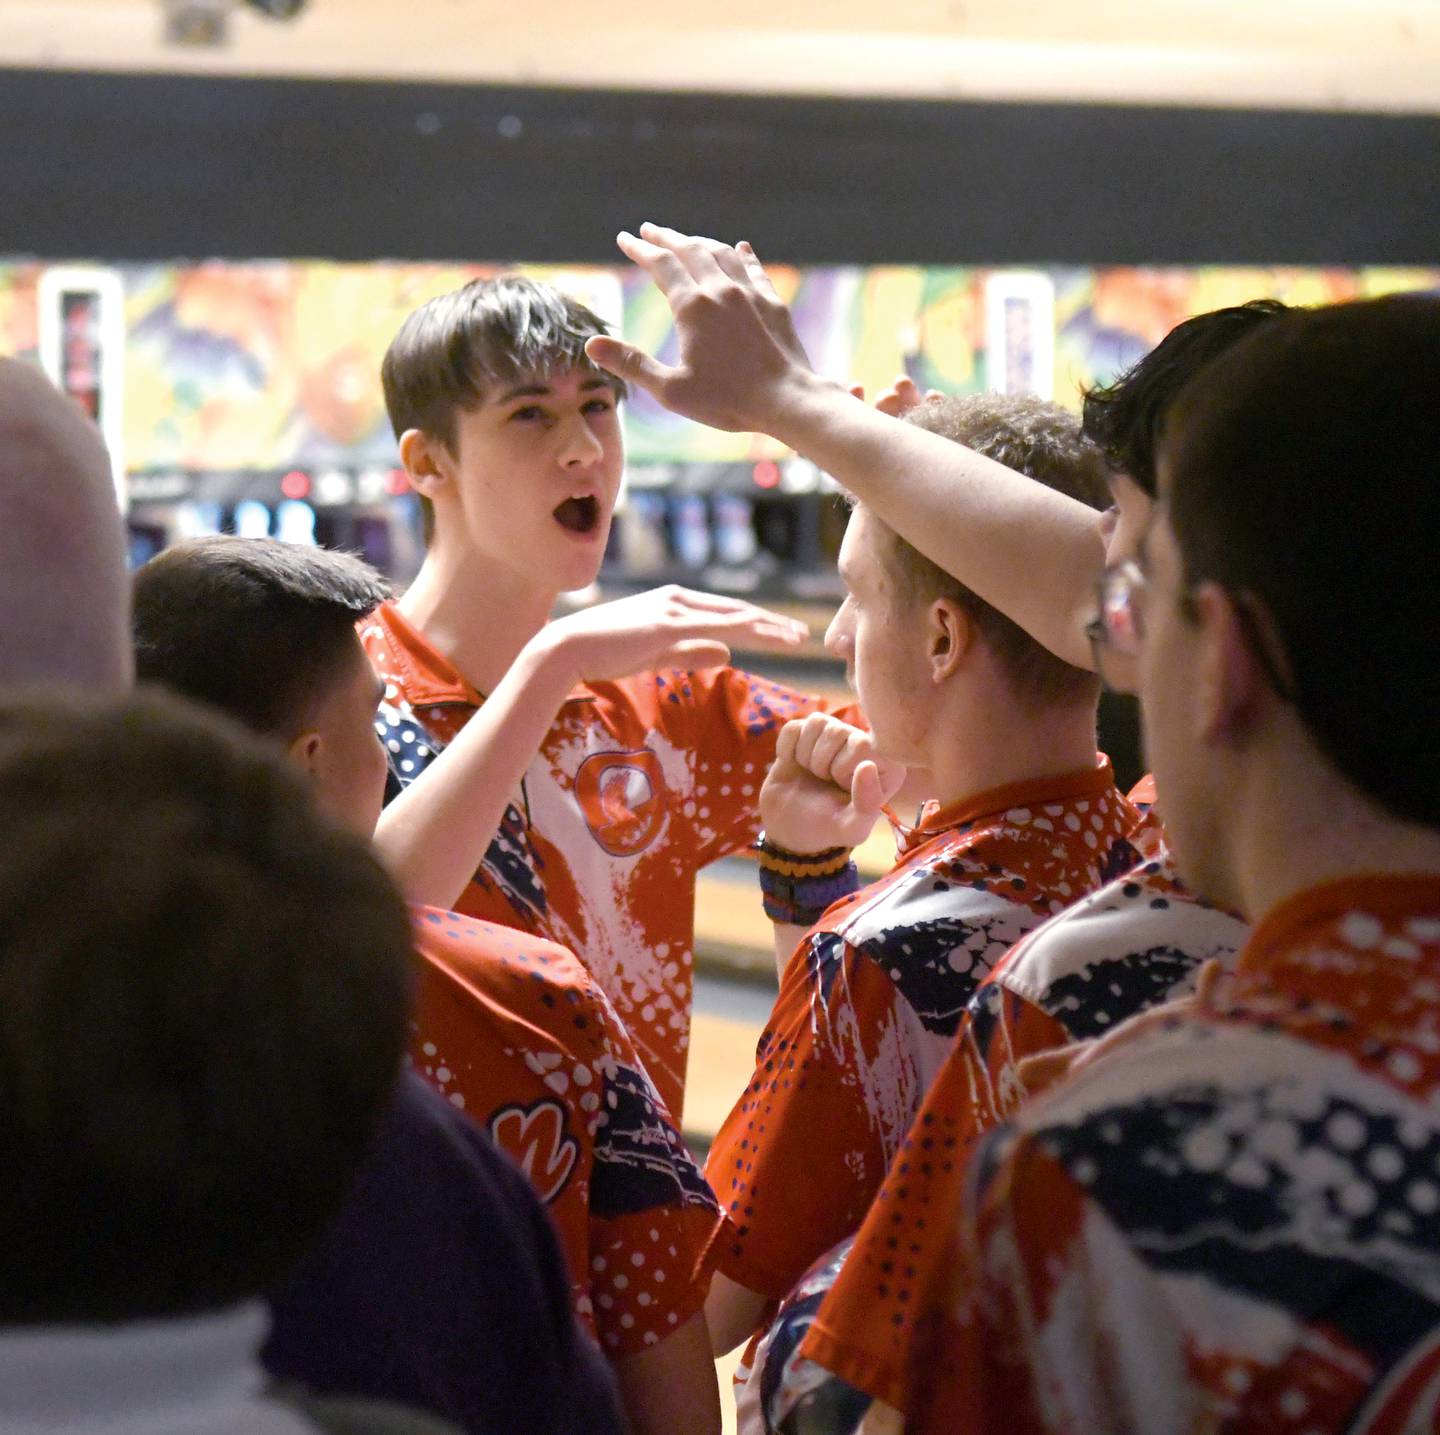 Oregon's Gavvin Surmo celebrates a strike with his team during the IHSA bowling sectional at Don Carter Lanes in Rockford on Saturday, Jan. 21.